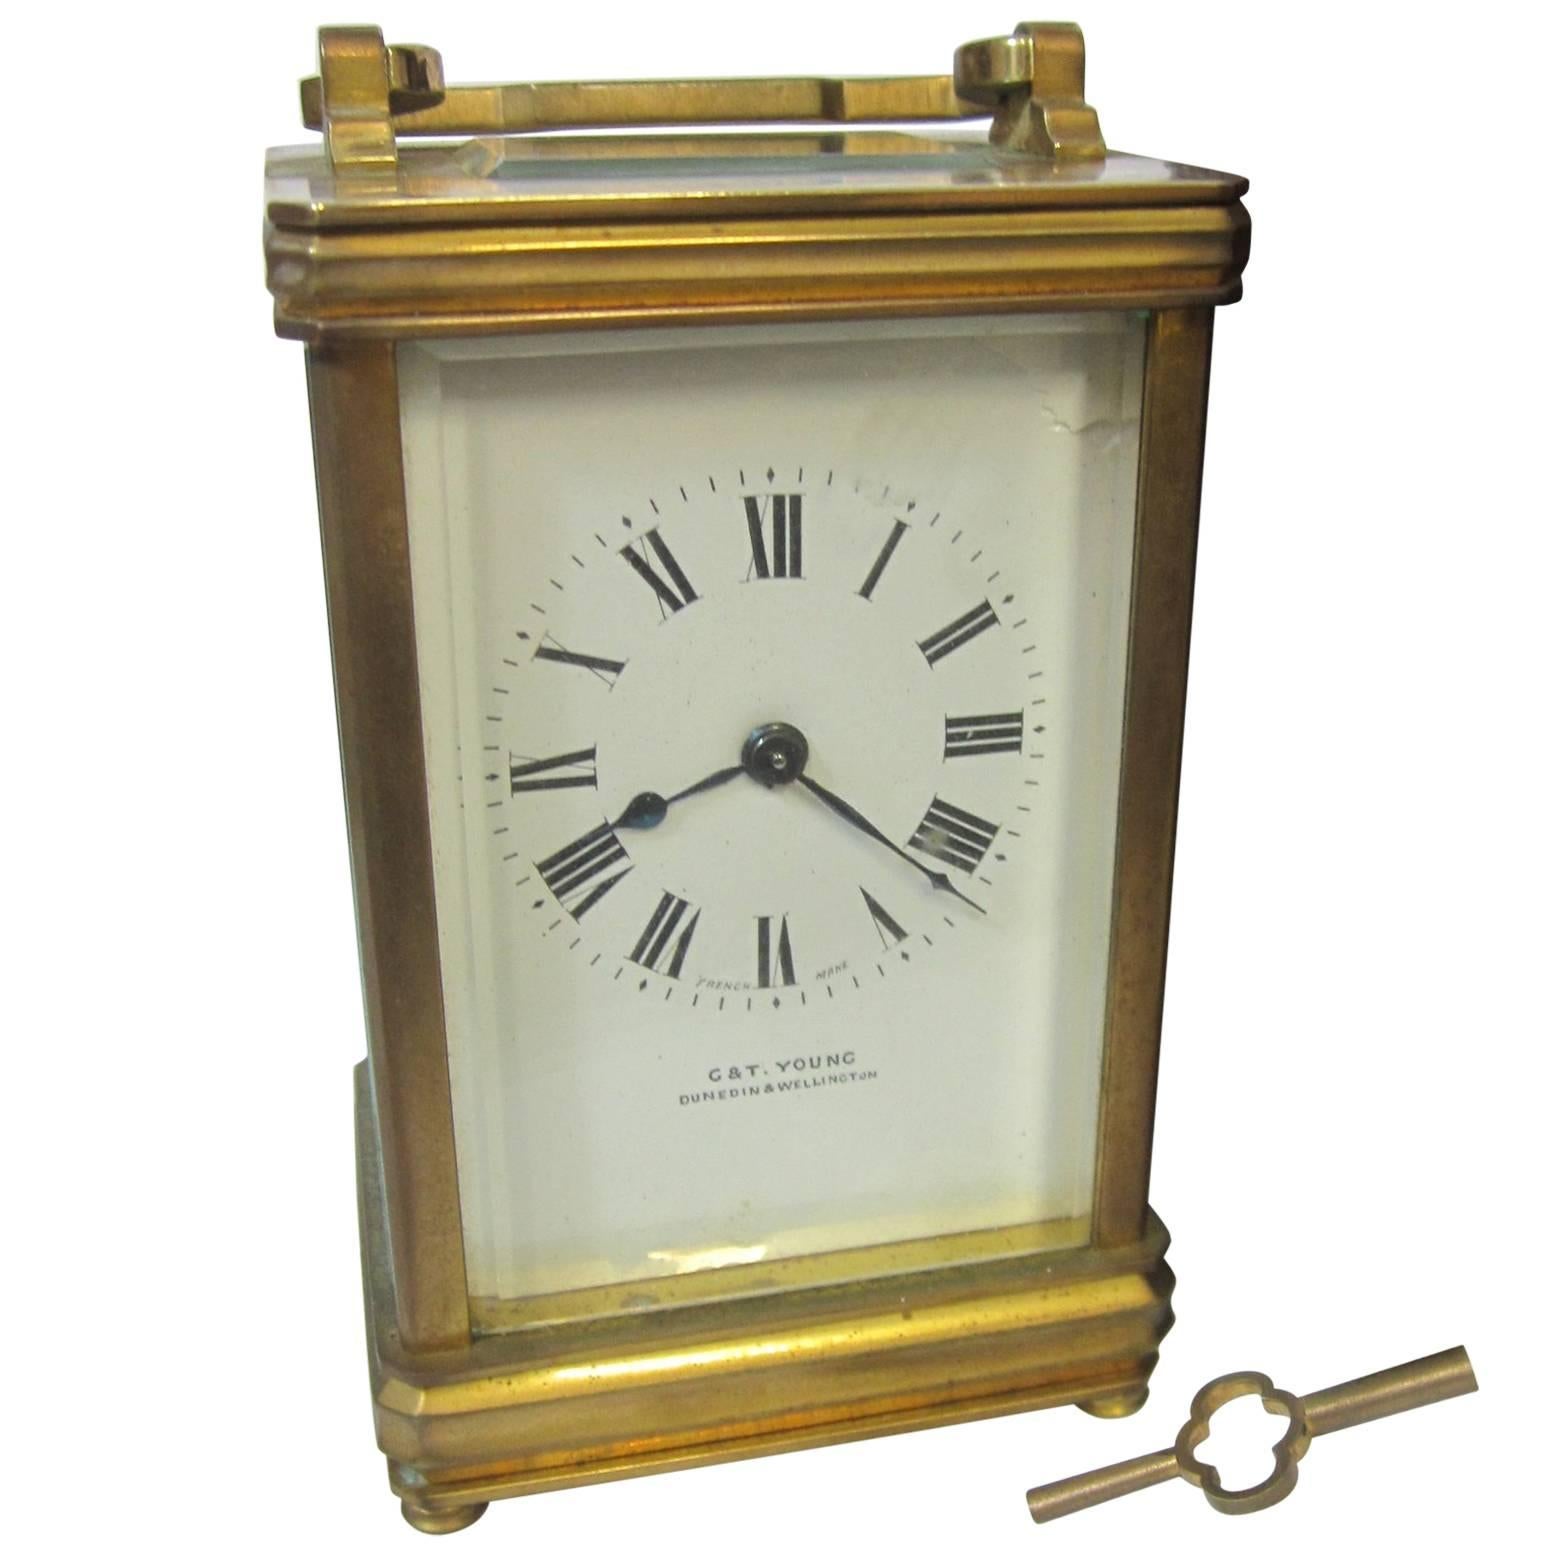 French Carriage Clock with New Zealand Retailer